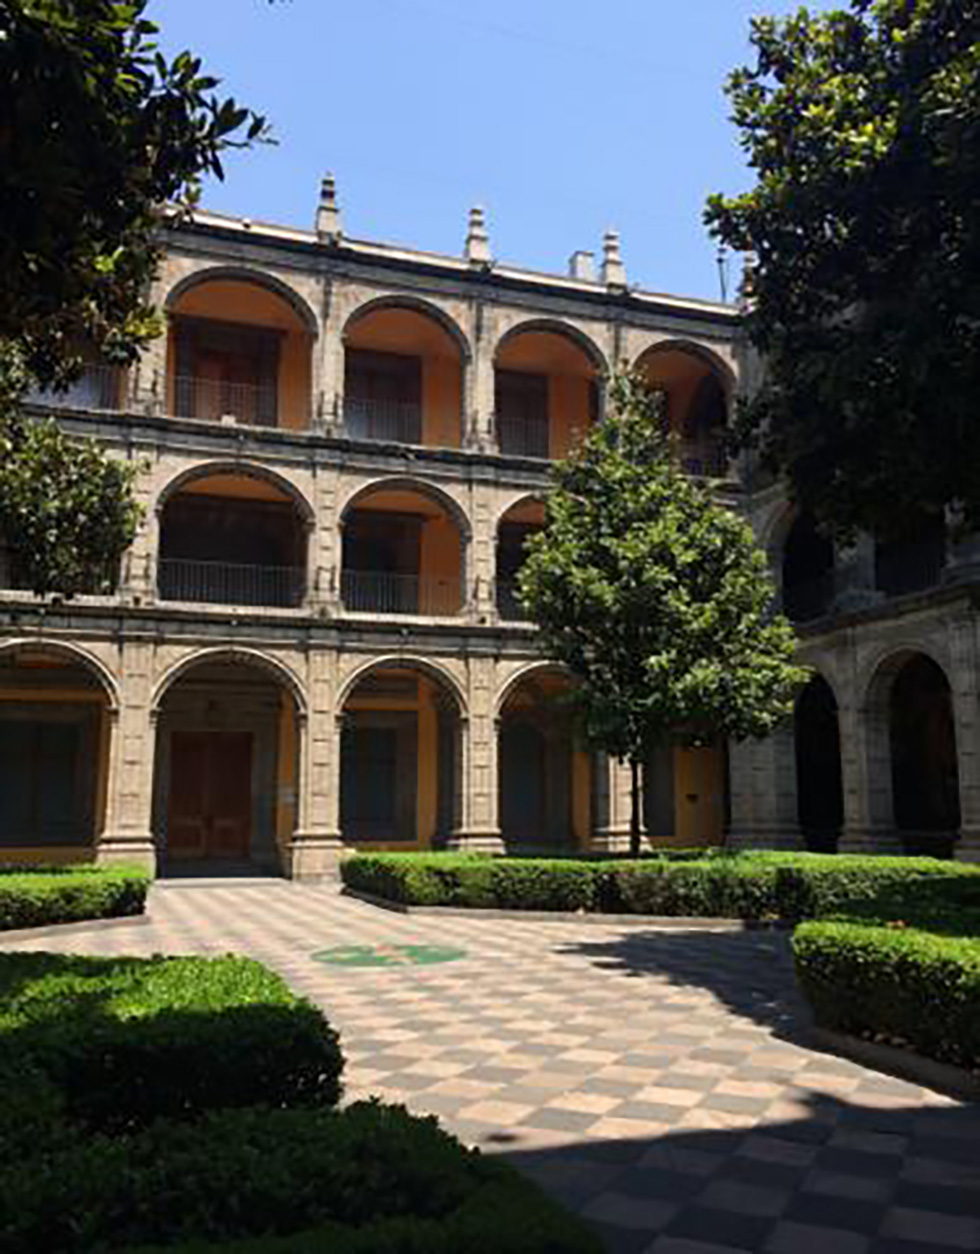 College of San Ildefonso in Mexico City